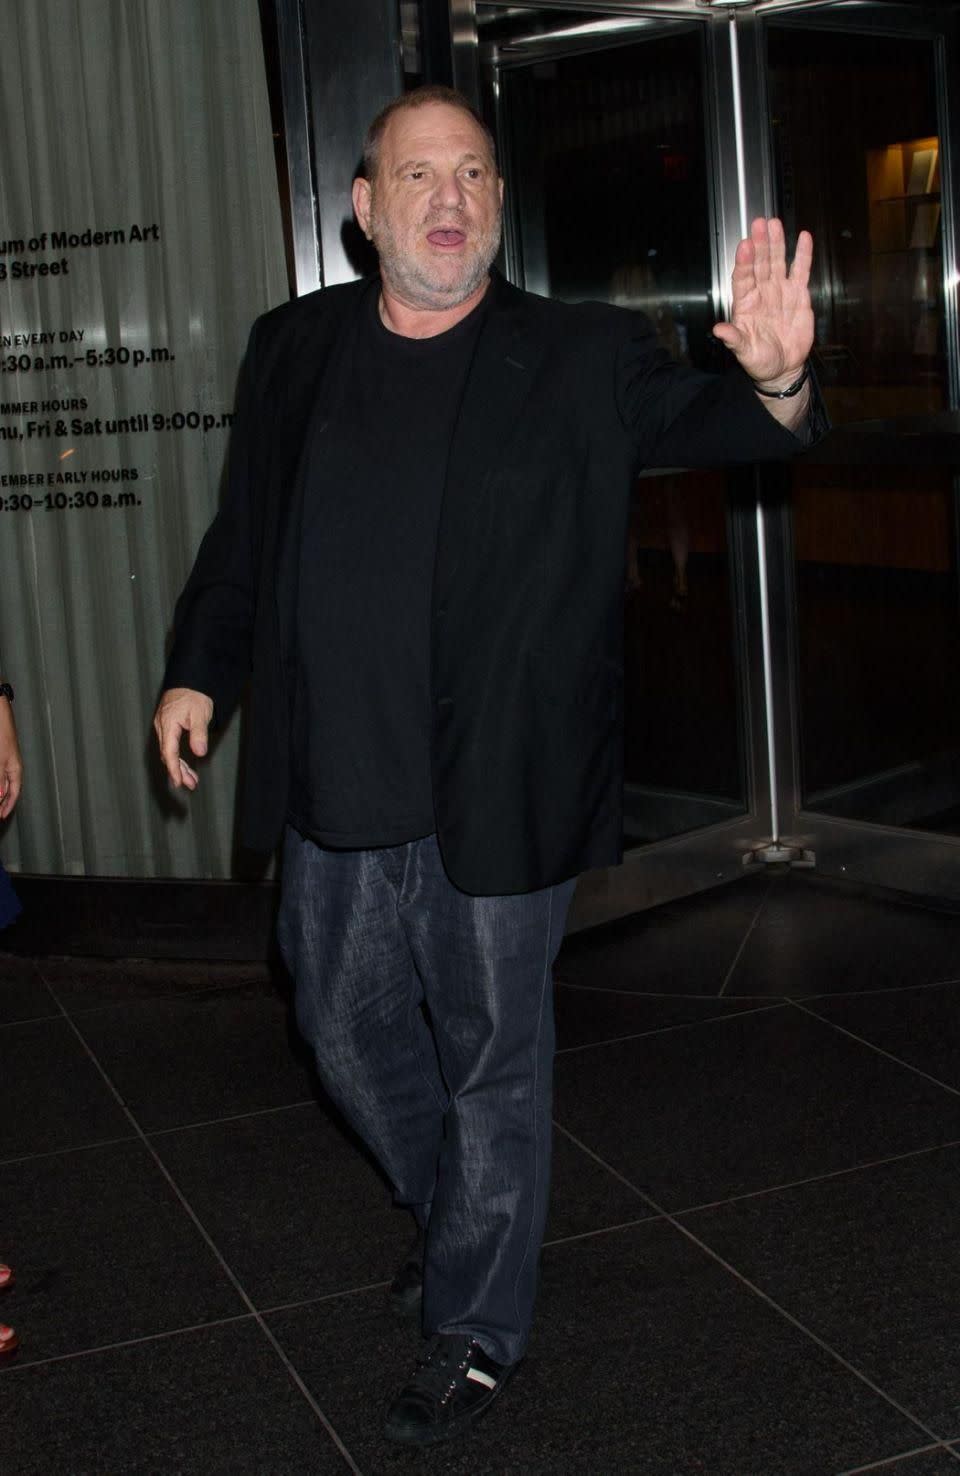 Harvey Weinstein is now reportedly planning to flee the US and head to Europe for a stint in rehab. Source: Getty